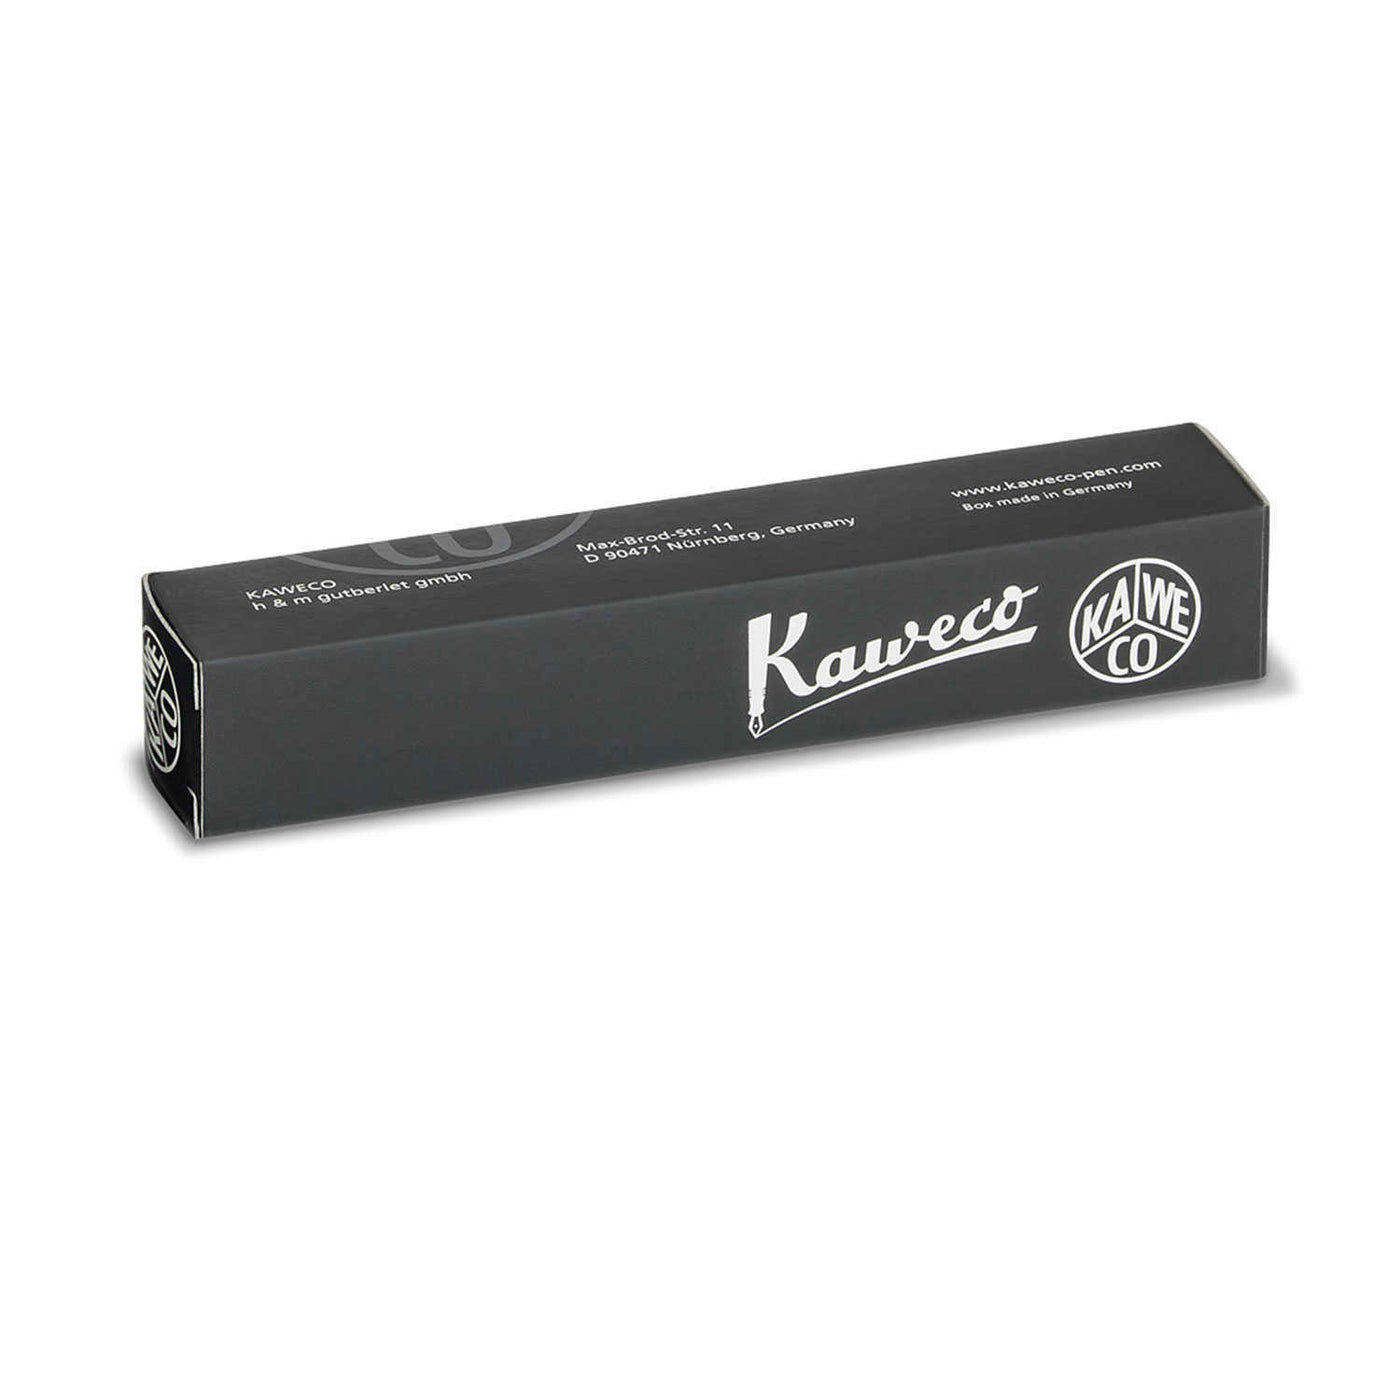 Kaweco Classic Sport Fountain Pen with Optional Clip - Chess Black 7